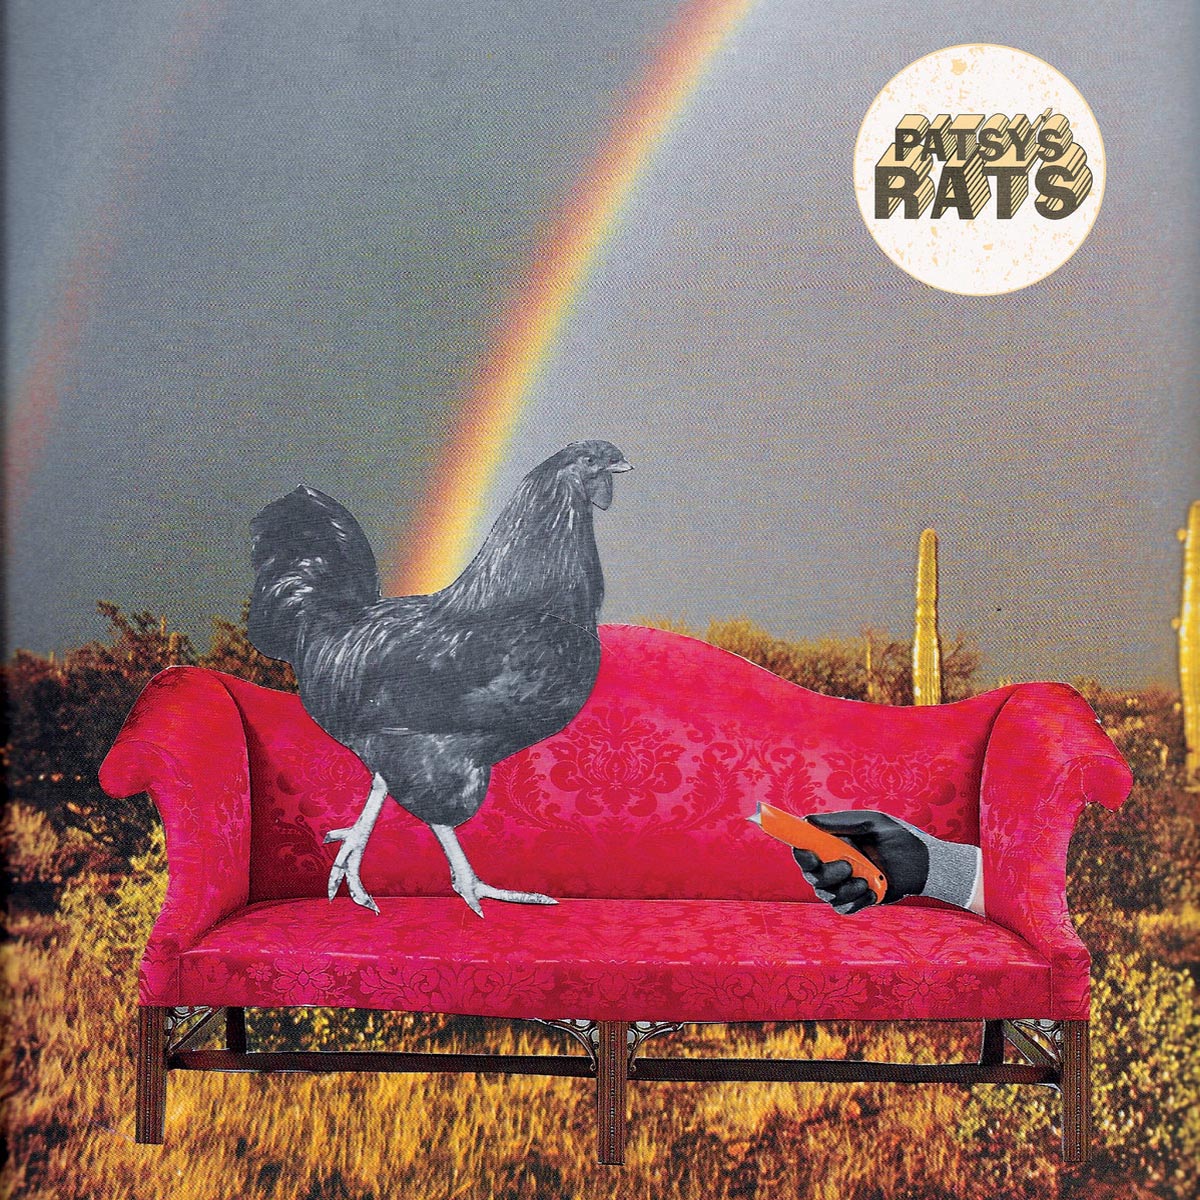 Patsy's Rats- Rounding Up 7” ~EX MEAN JEANS / RARE WHITE WAX LTD TO 200!